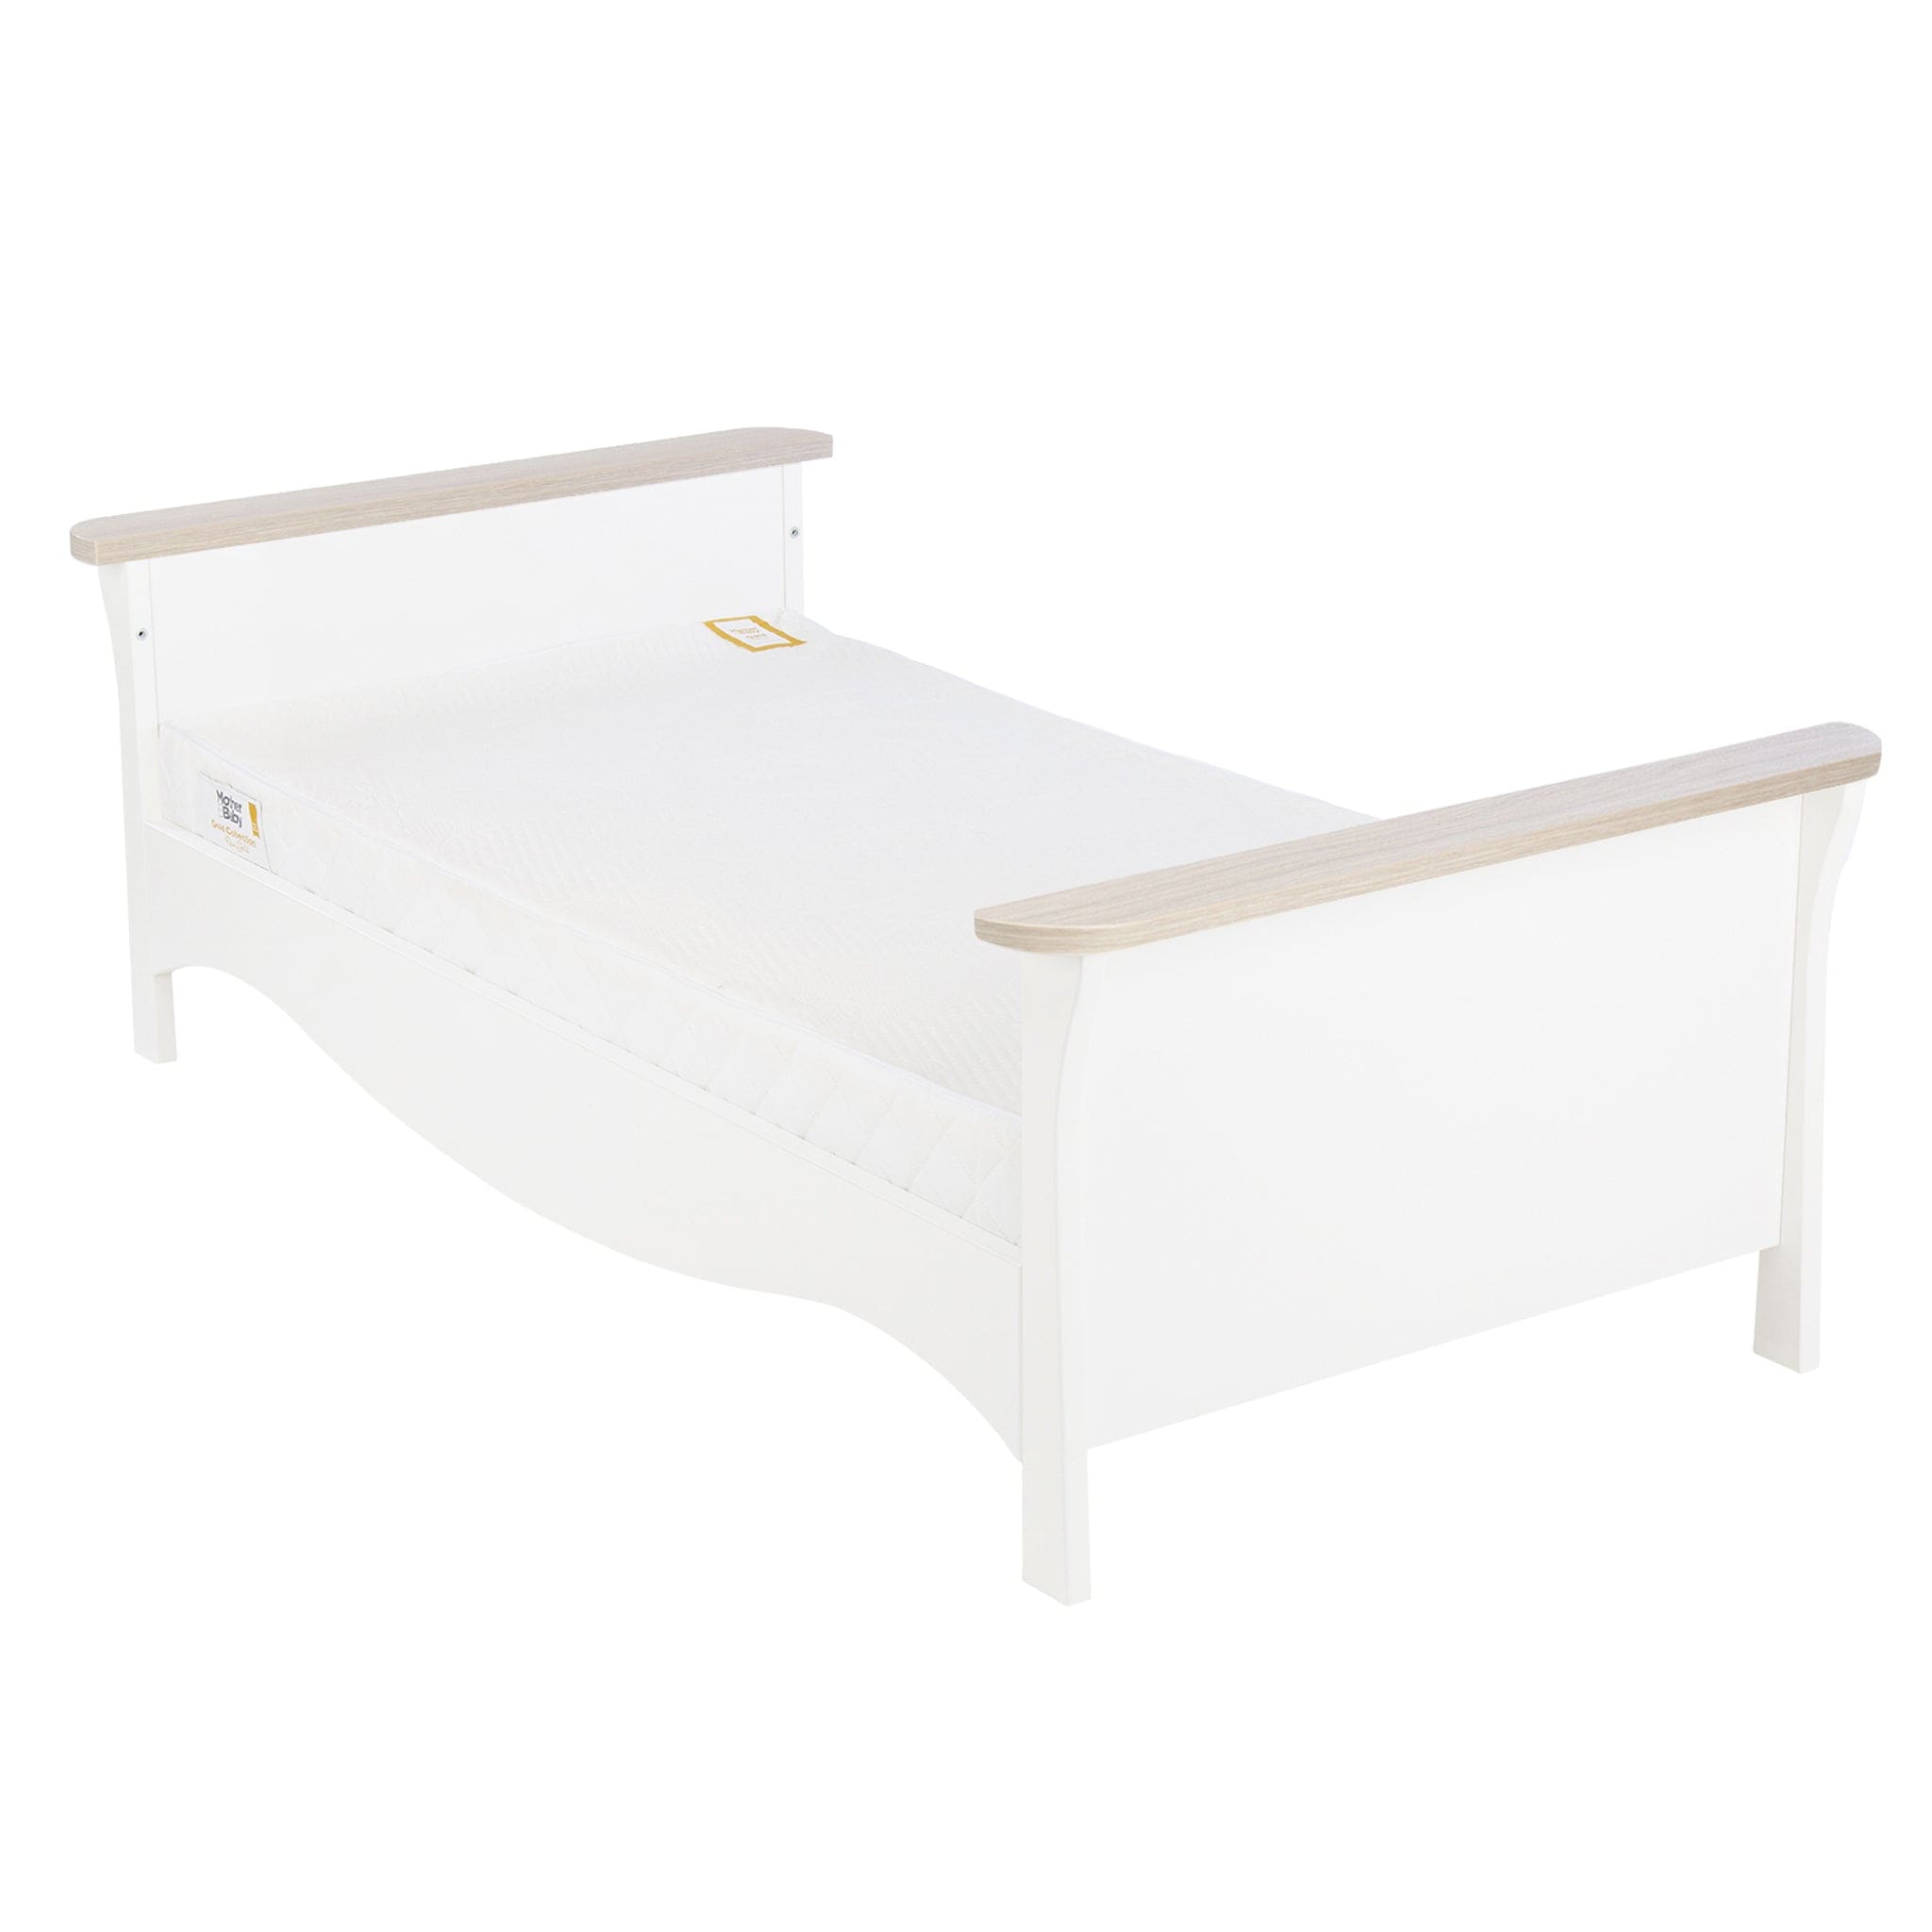 CuddleCo Cot Beds CuddleCo Clara Cot Bed in White & Ash